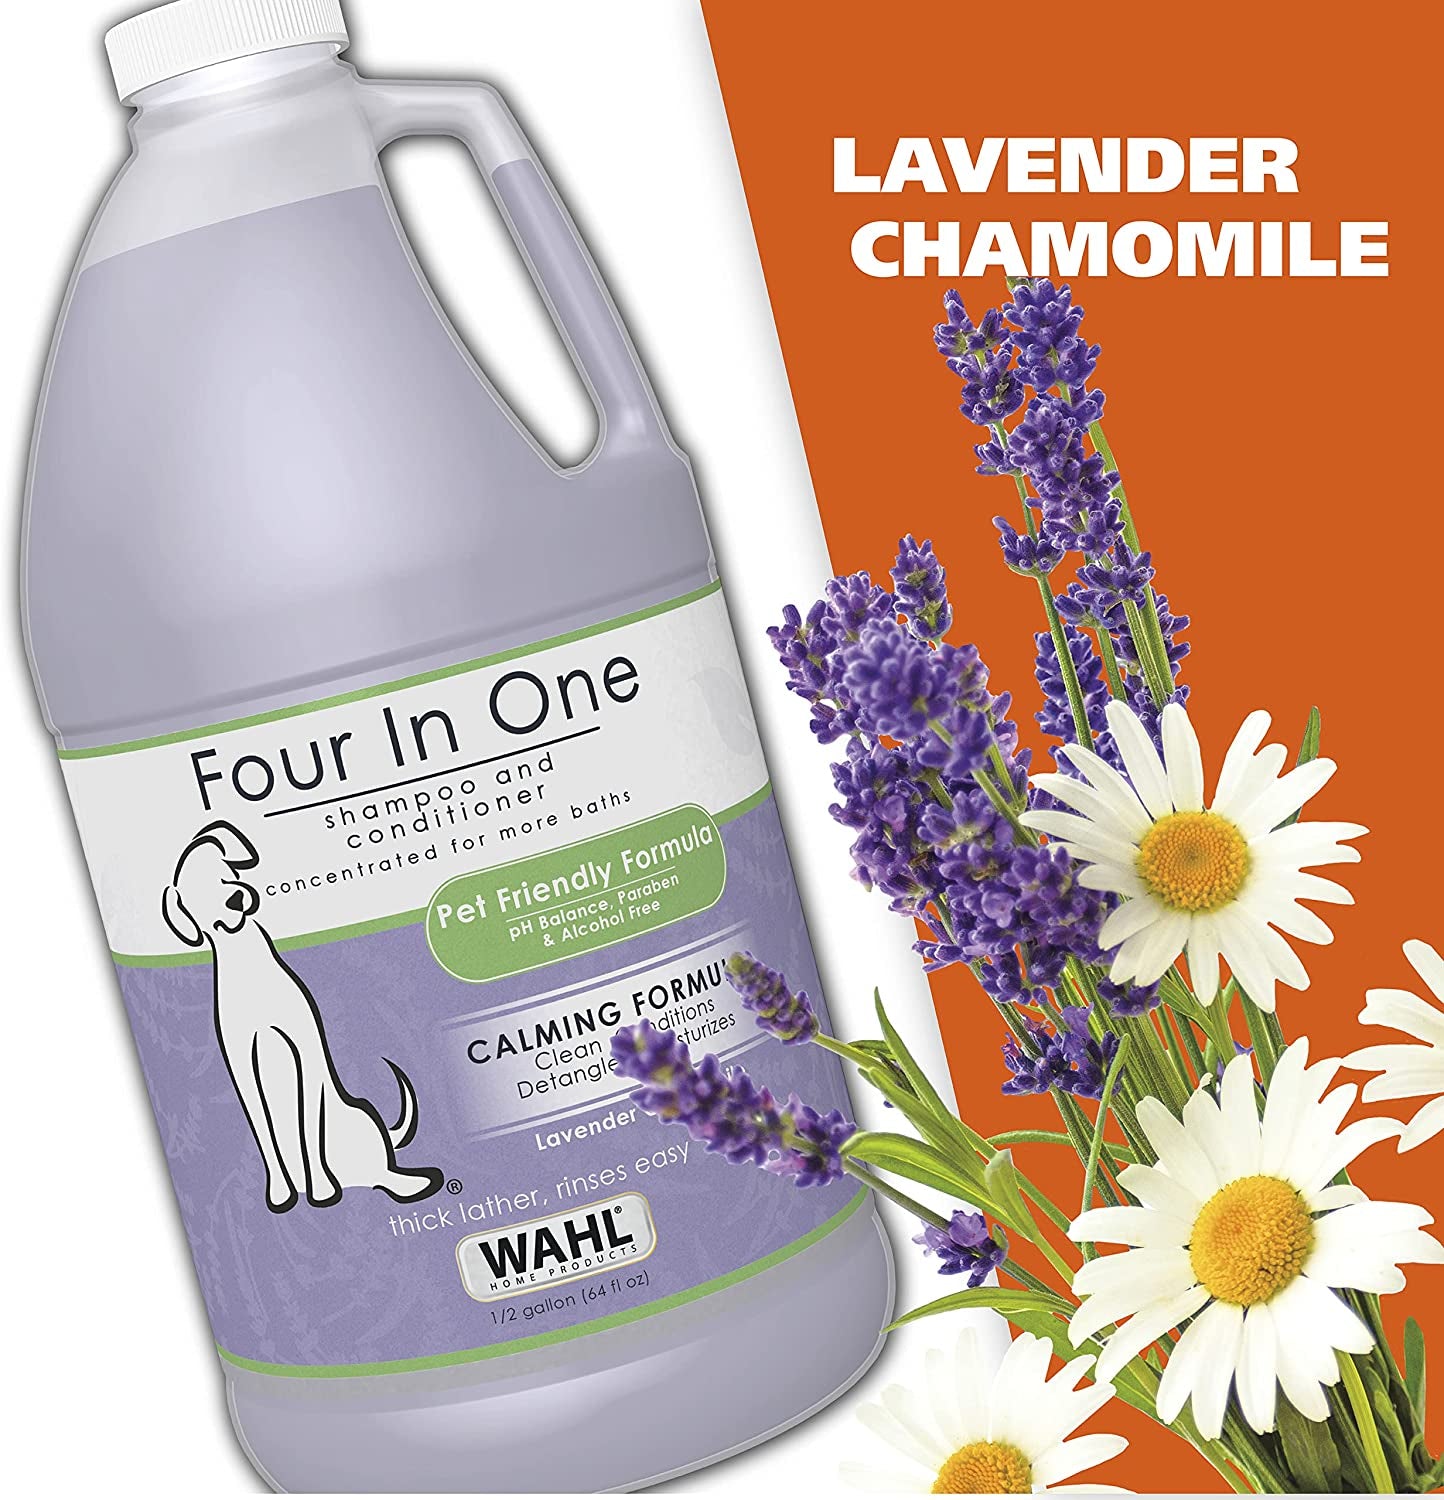 USA 4-In-1 Calming Pet Shampoo for Dogs – Cleans, Conditions, Detangles, & Moisturizes with Lavender Chamomile - Pet Friendly Formula – 64 Oz - Model 821000-050